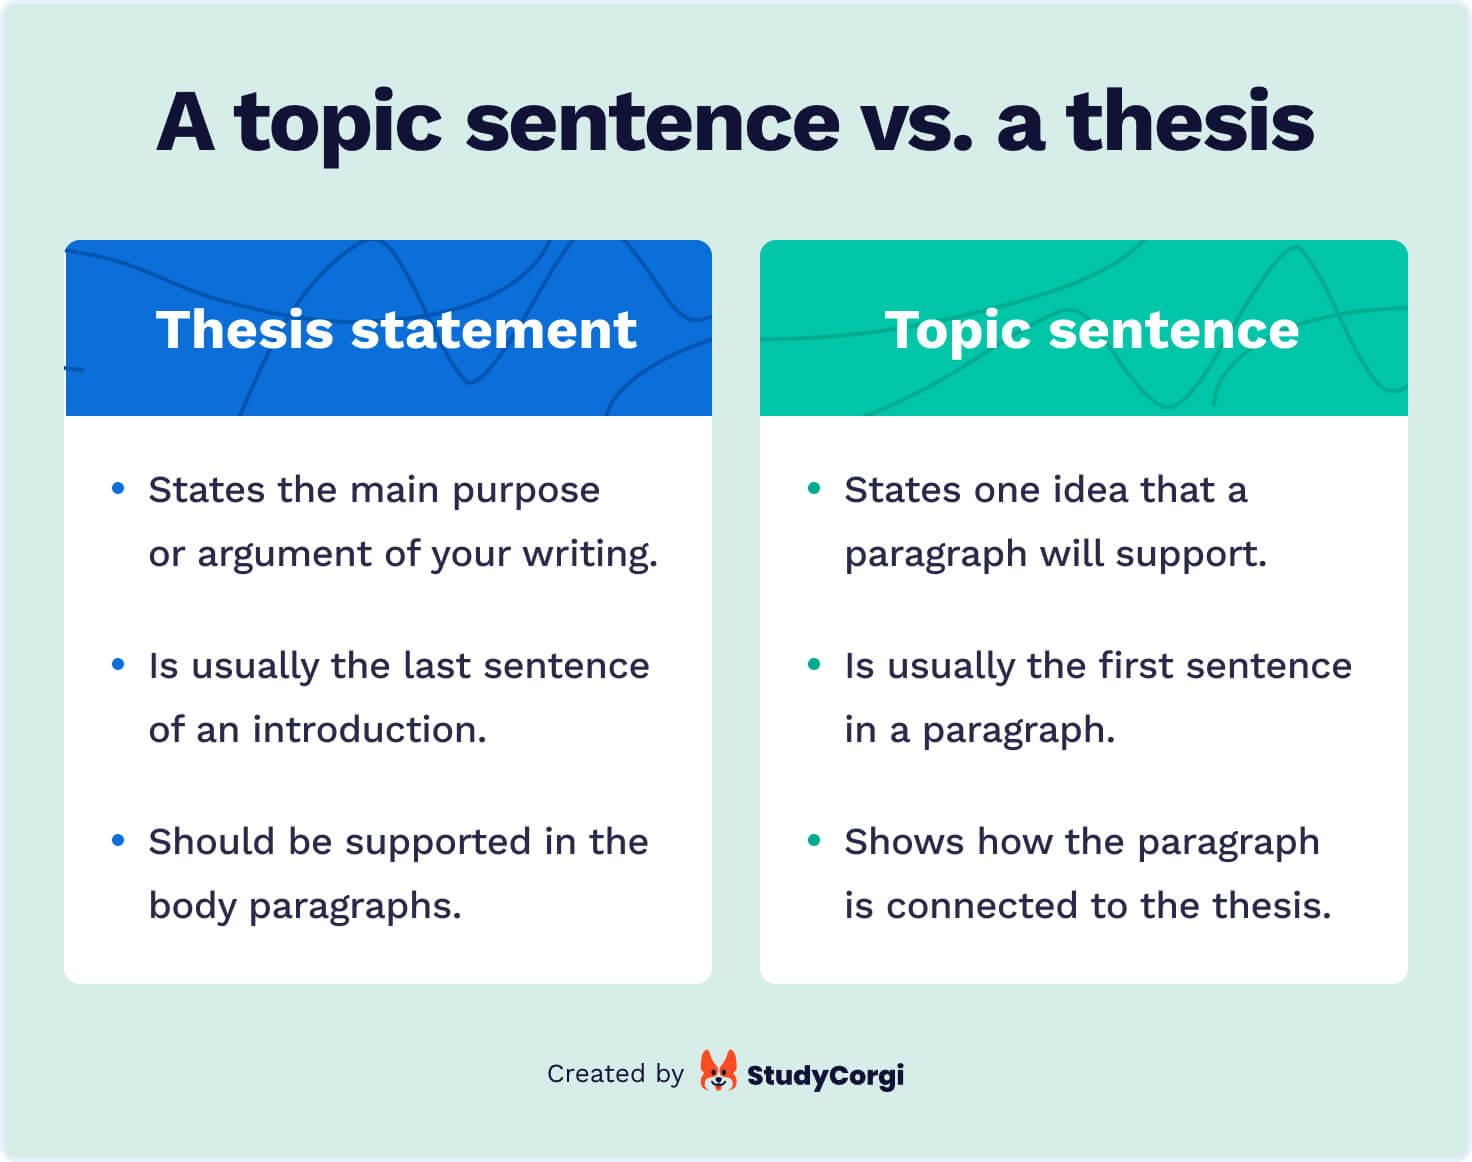 what is difference between thesis statement and topic sentence